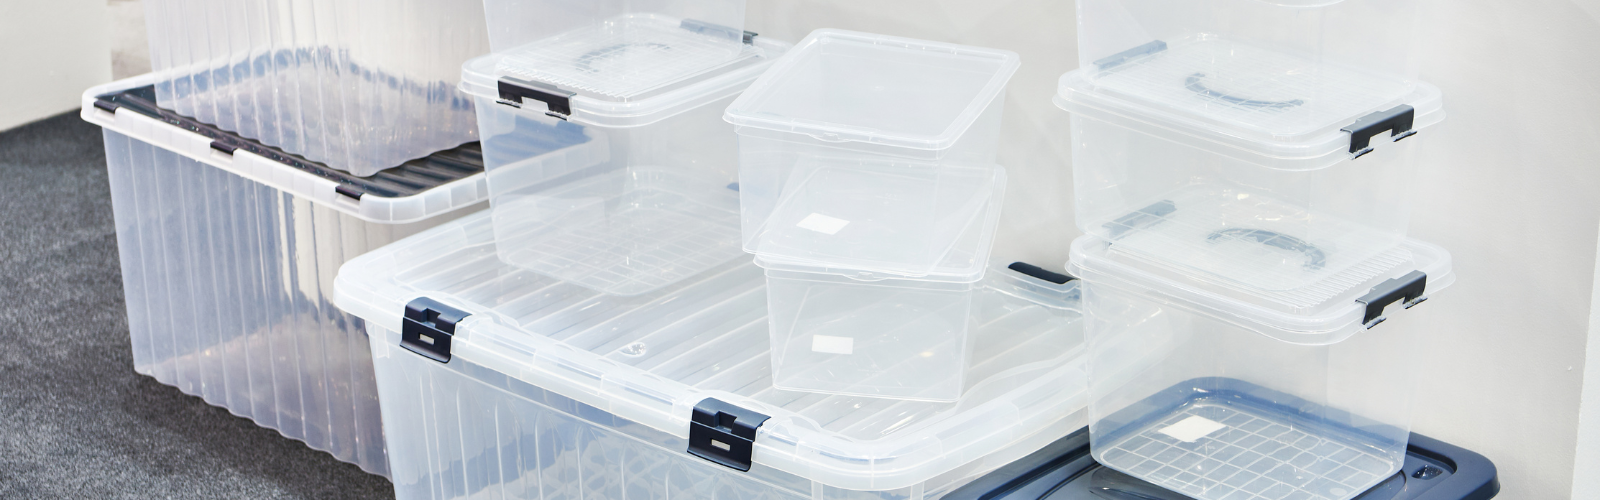 Favorite Organizing Things: Clear, Airtight Containers | Uncluttered